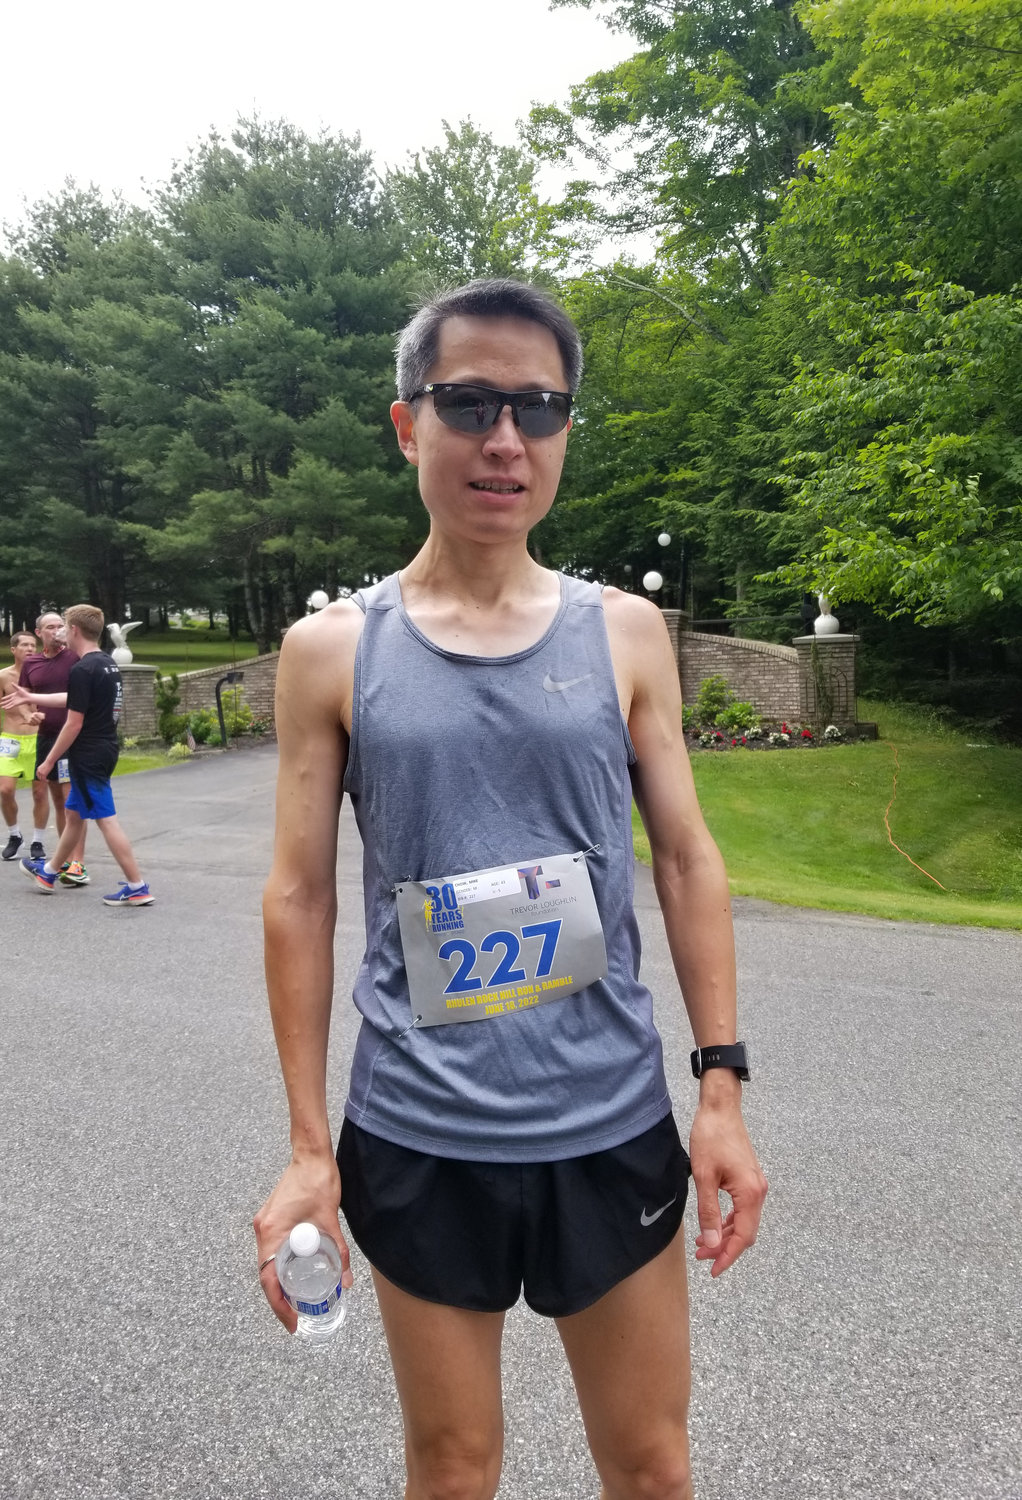 Mike Chow from Poughkeepsie finished first at 16 minutes and 53 seconds.